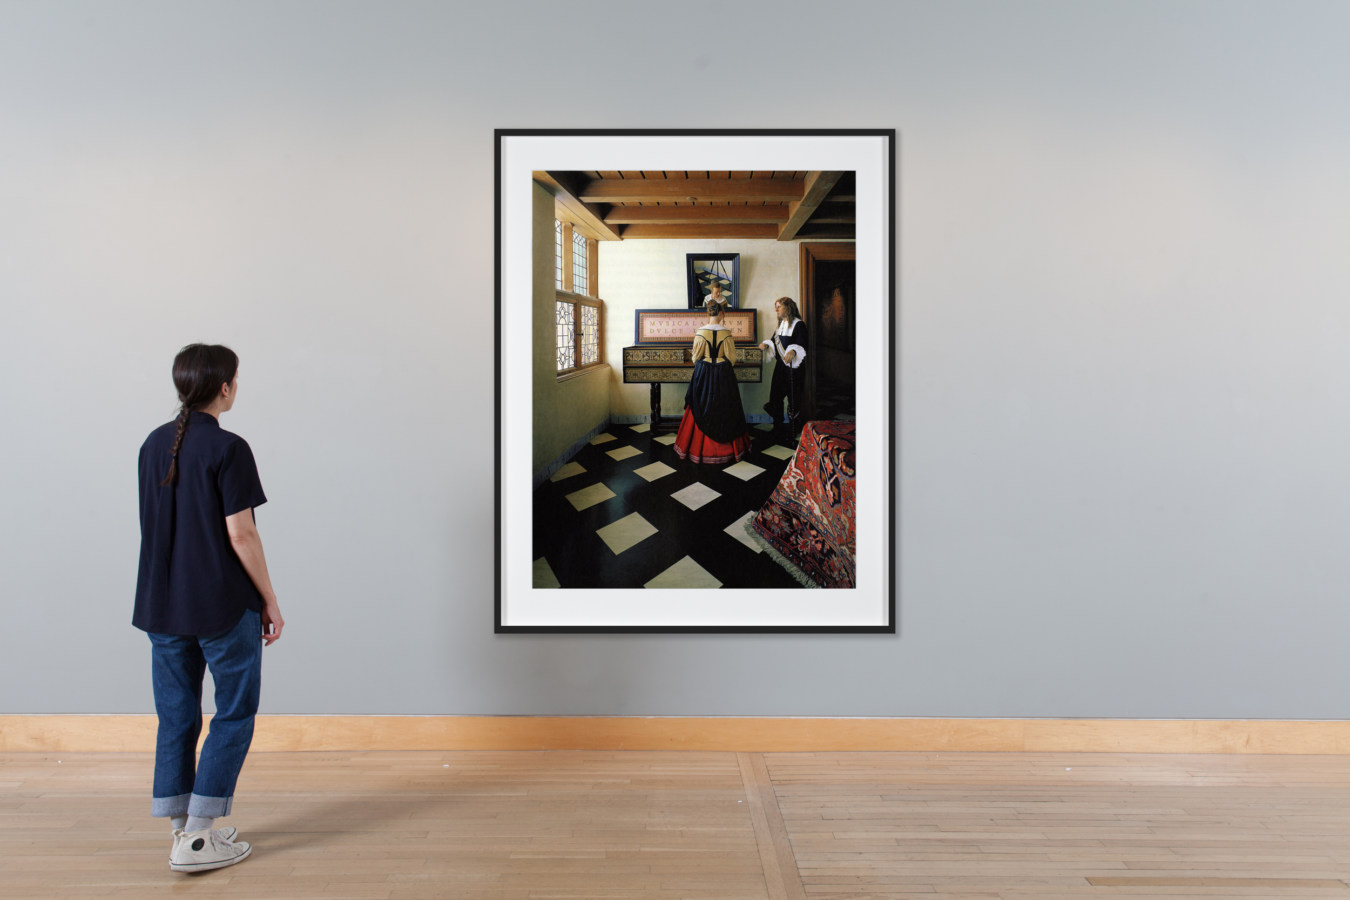 Installation view of a framed color photograph of a European Baroque scene of two people standing at a harpsichord.